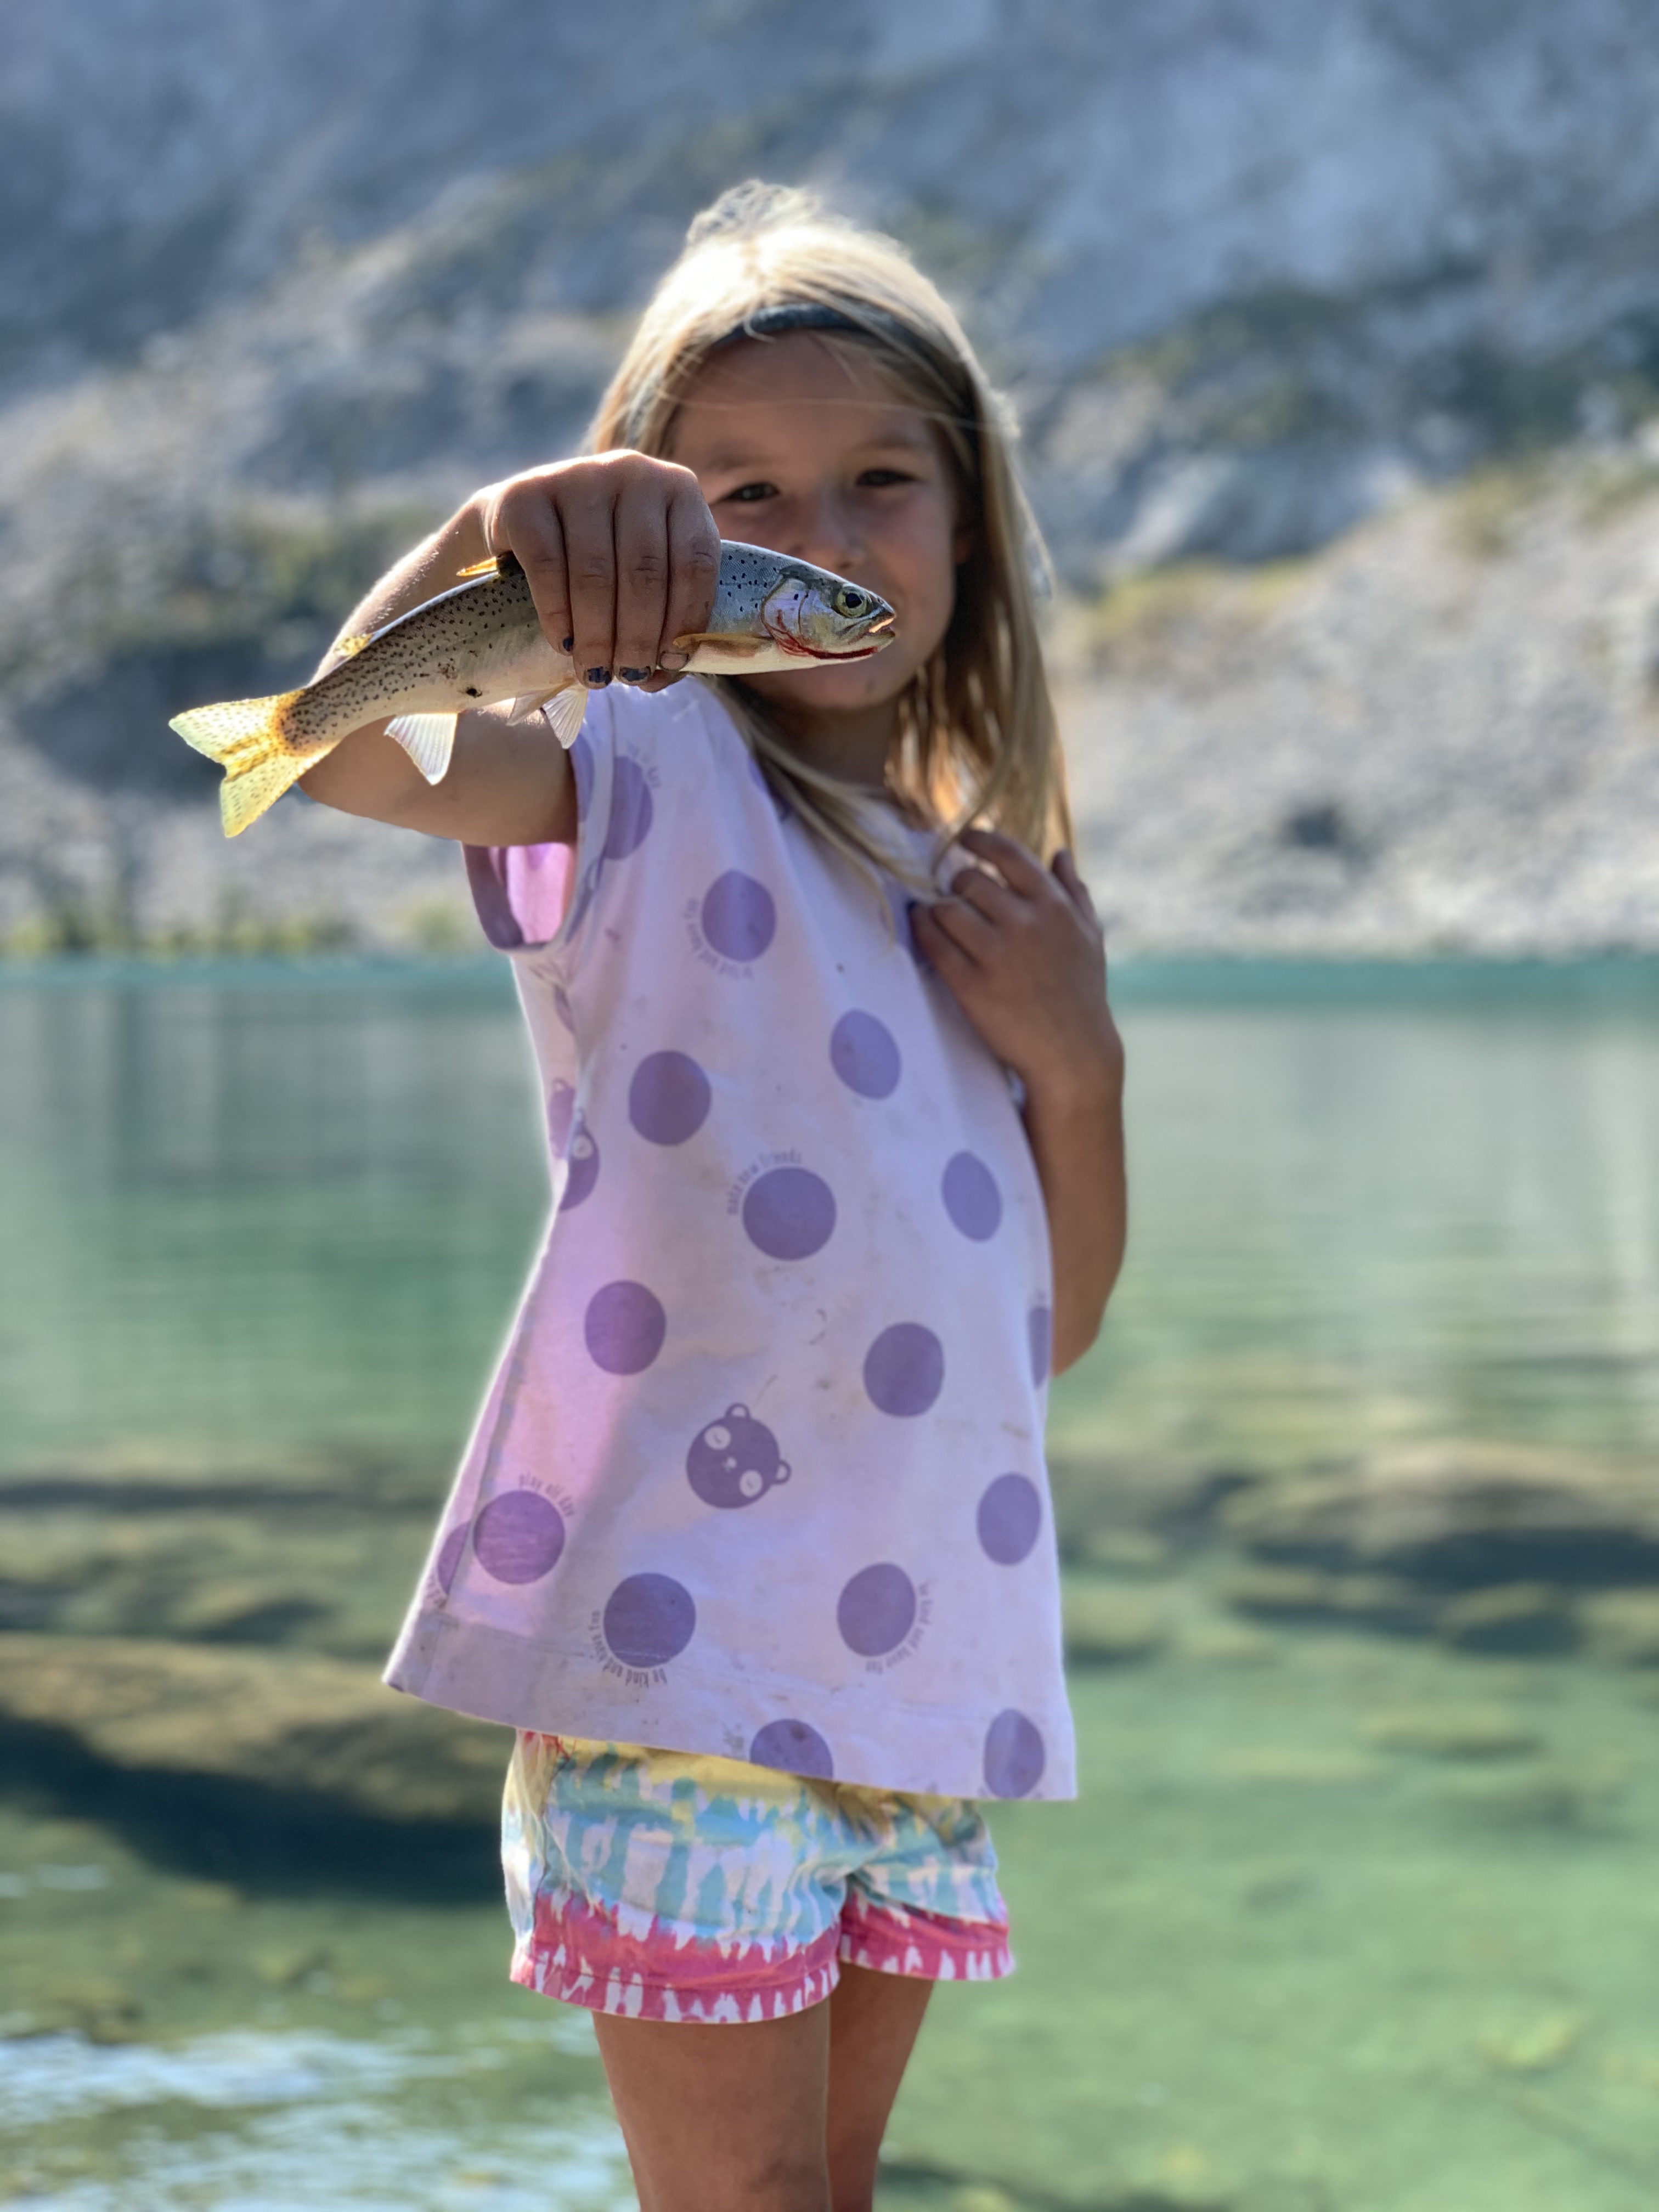 No matter where you live in Idaho, Free Fishing Day on June 10 offers